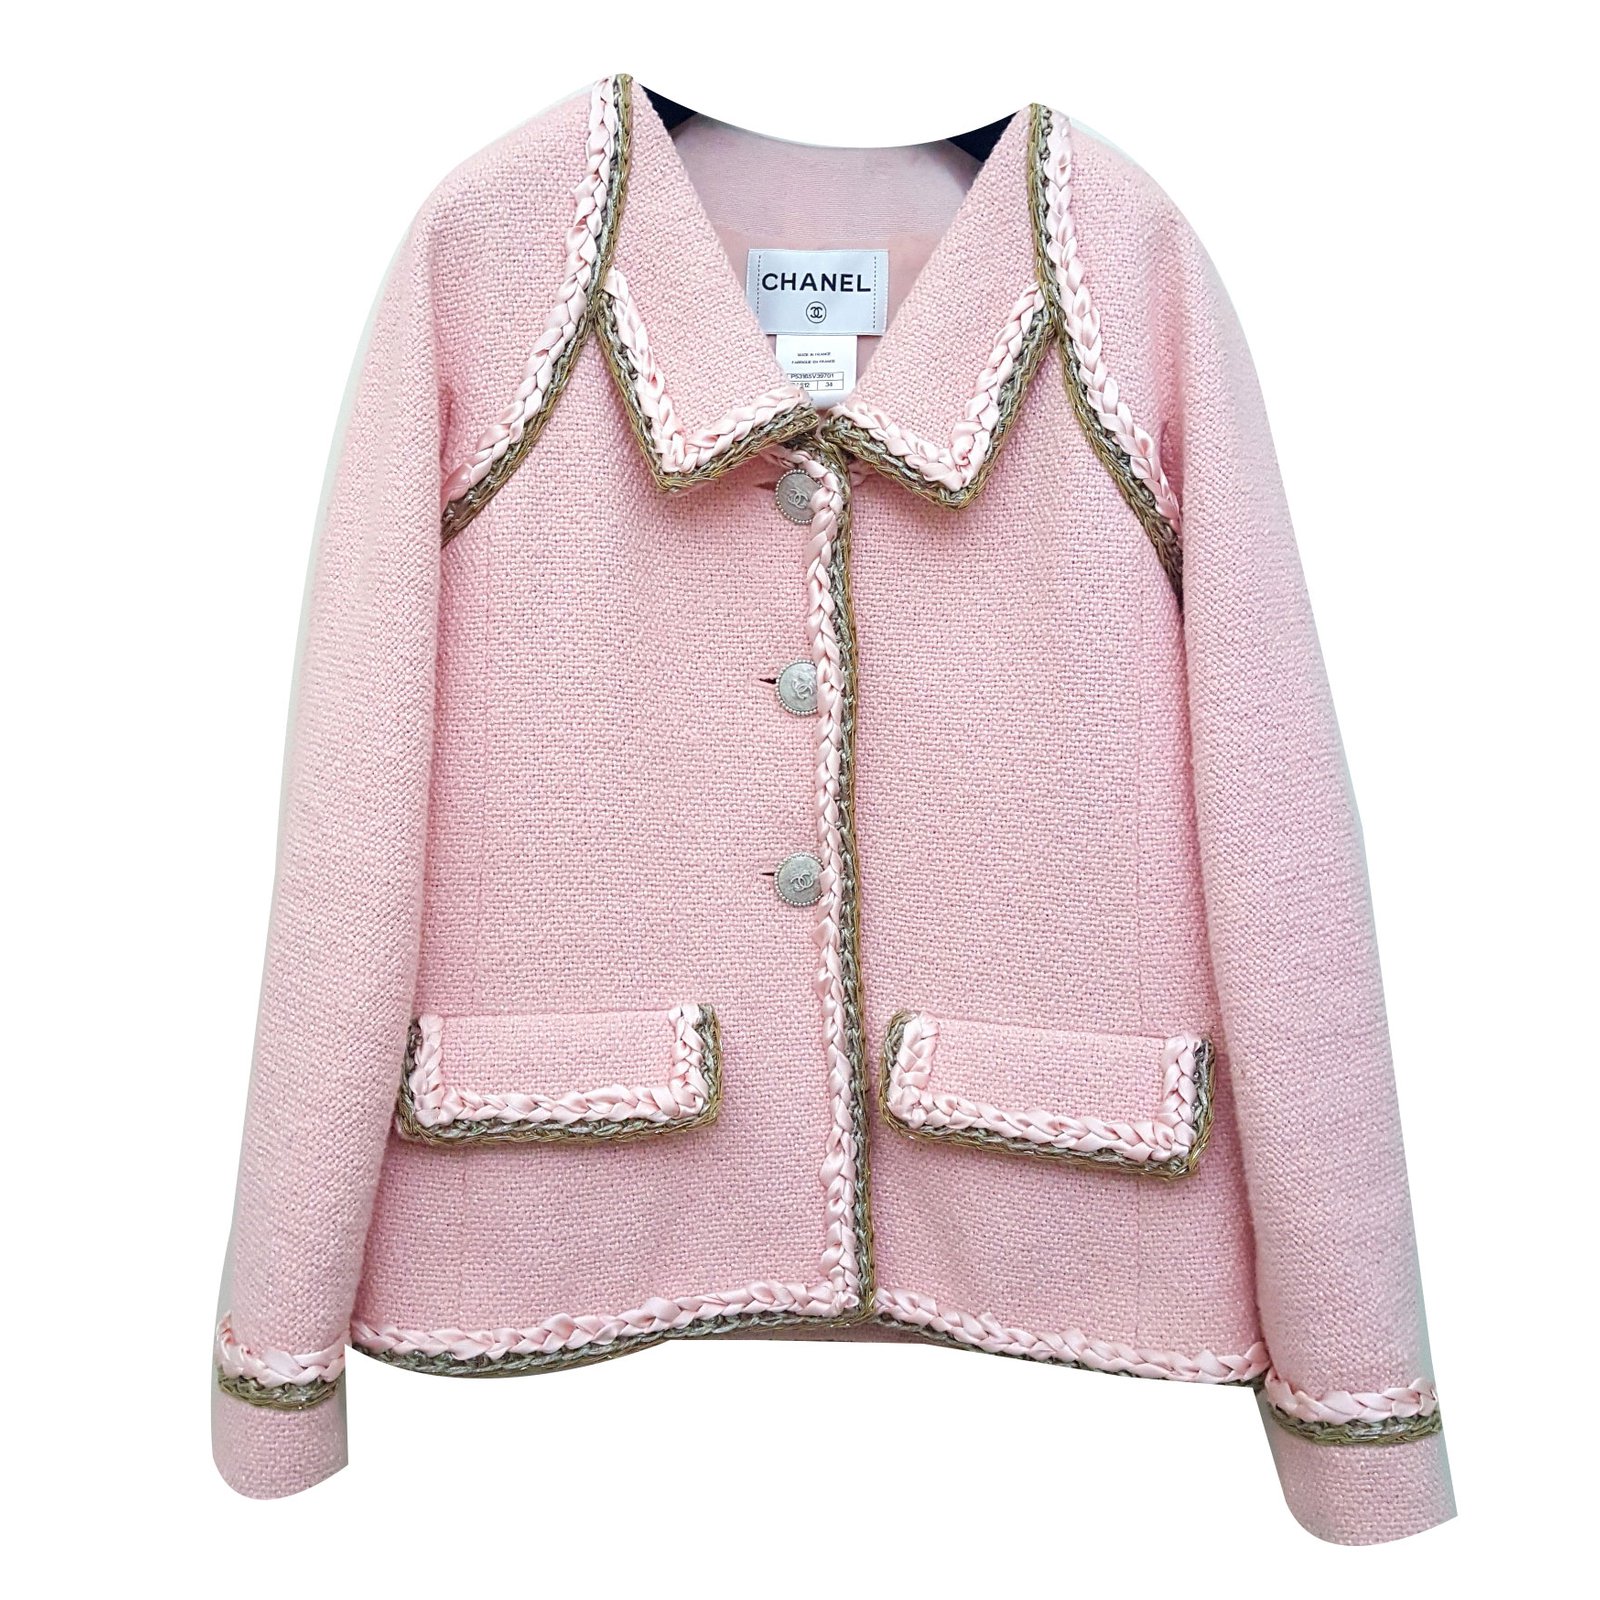 CHANEL 16C Cruise Resort 2016 Seoul Collection Pink Cotton Tweed Jacket ...